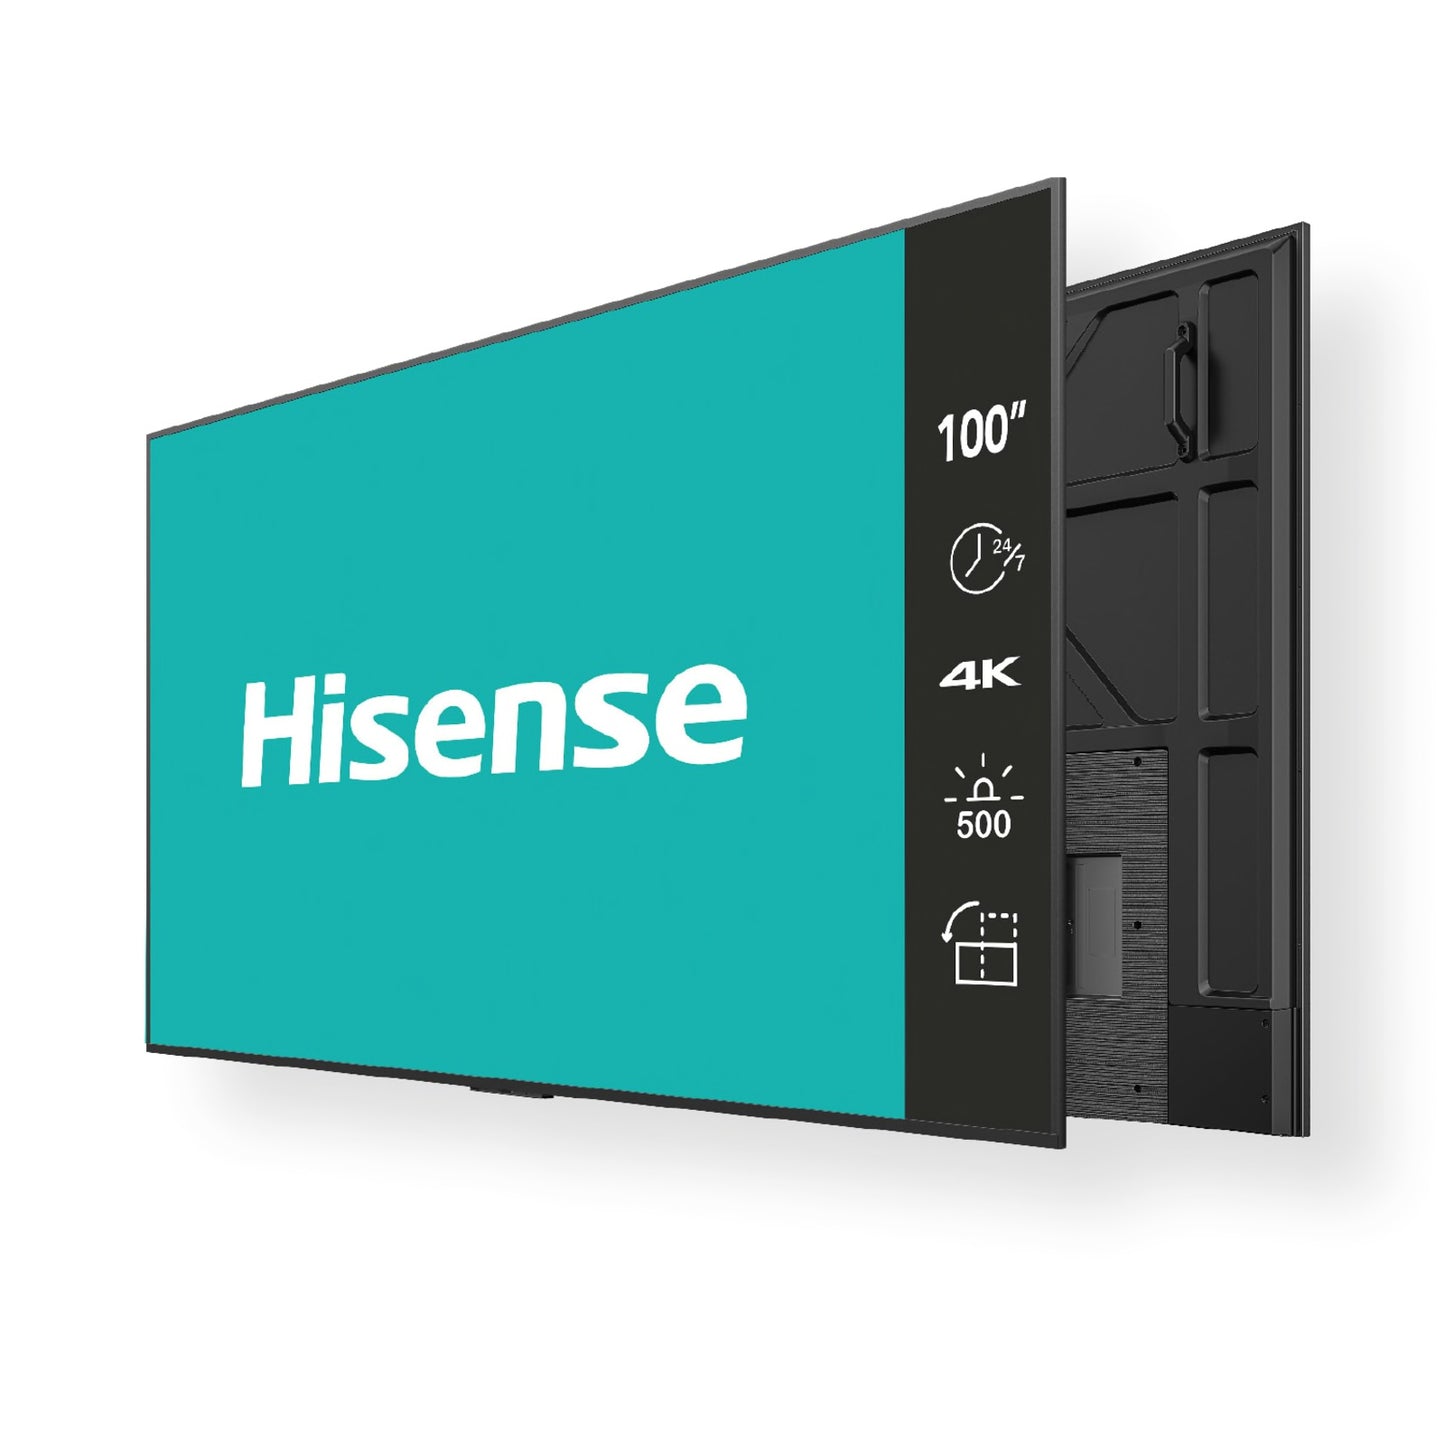 Hisense 100BM66D 100" Digital Signage Display 4K UHD 500 nits 24/7 Operation with Wifi and Android OS